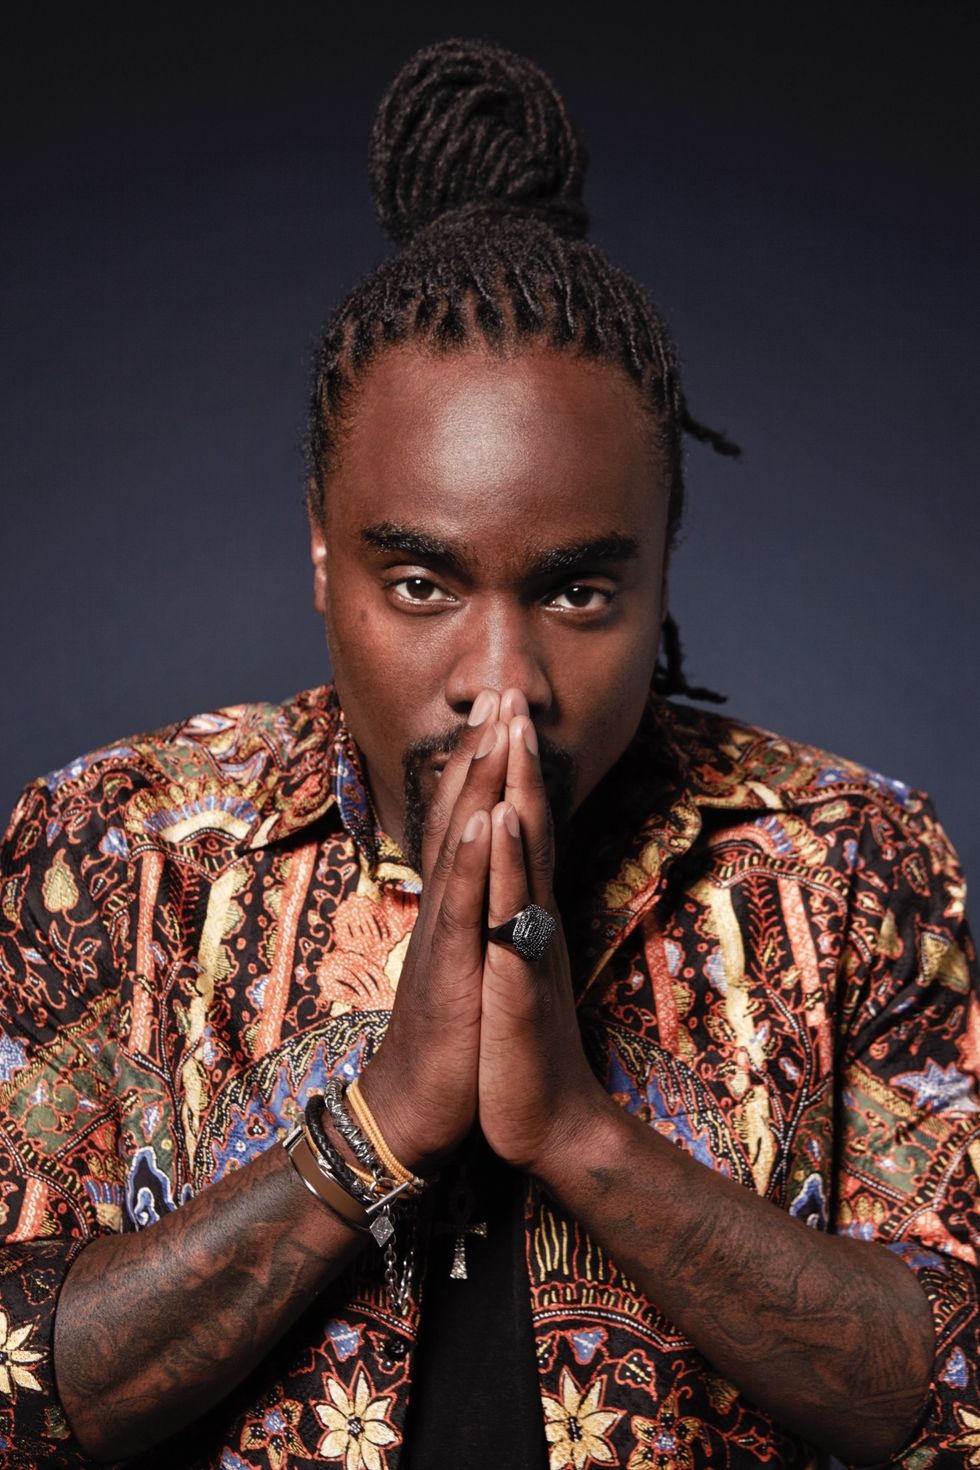 Wale: "I Look at Myself as a Black Man in America, But as a Nigerian First"